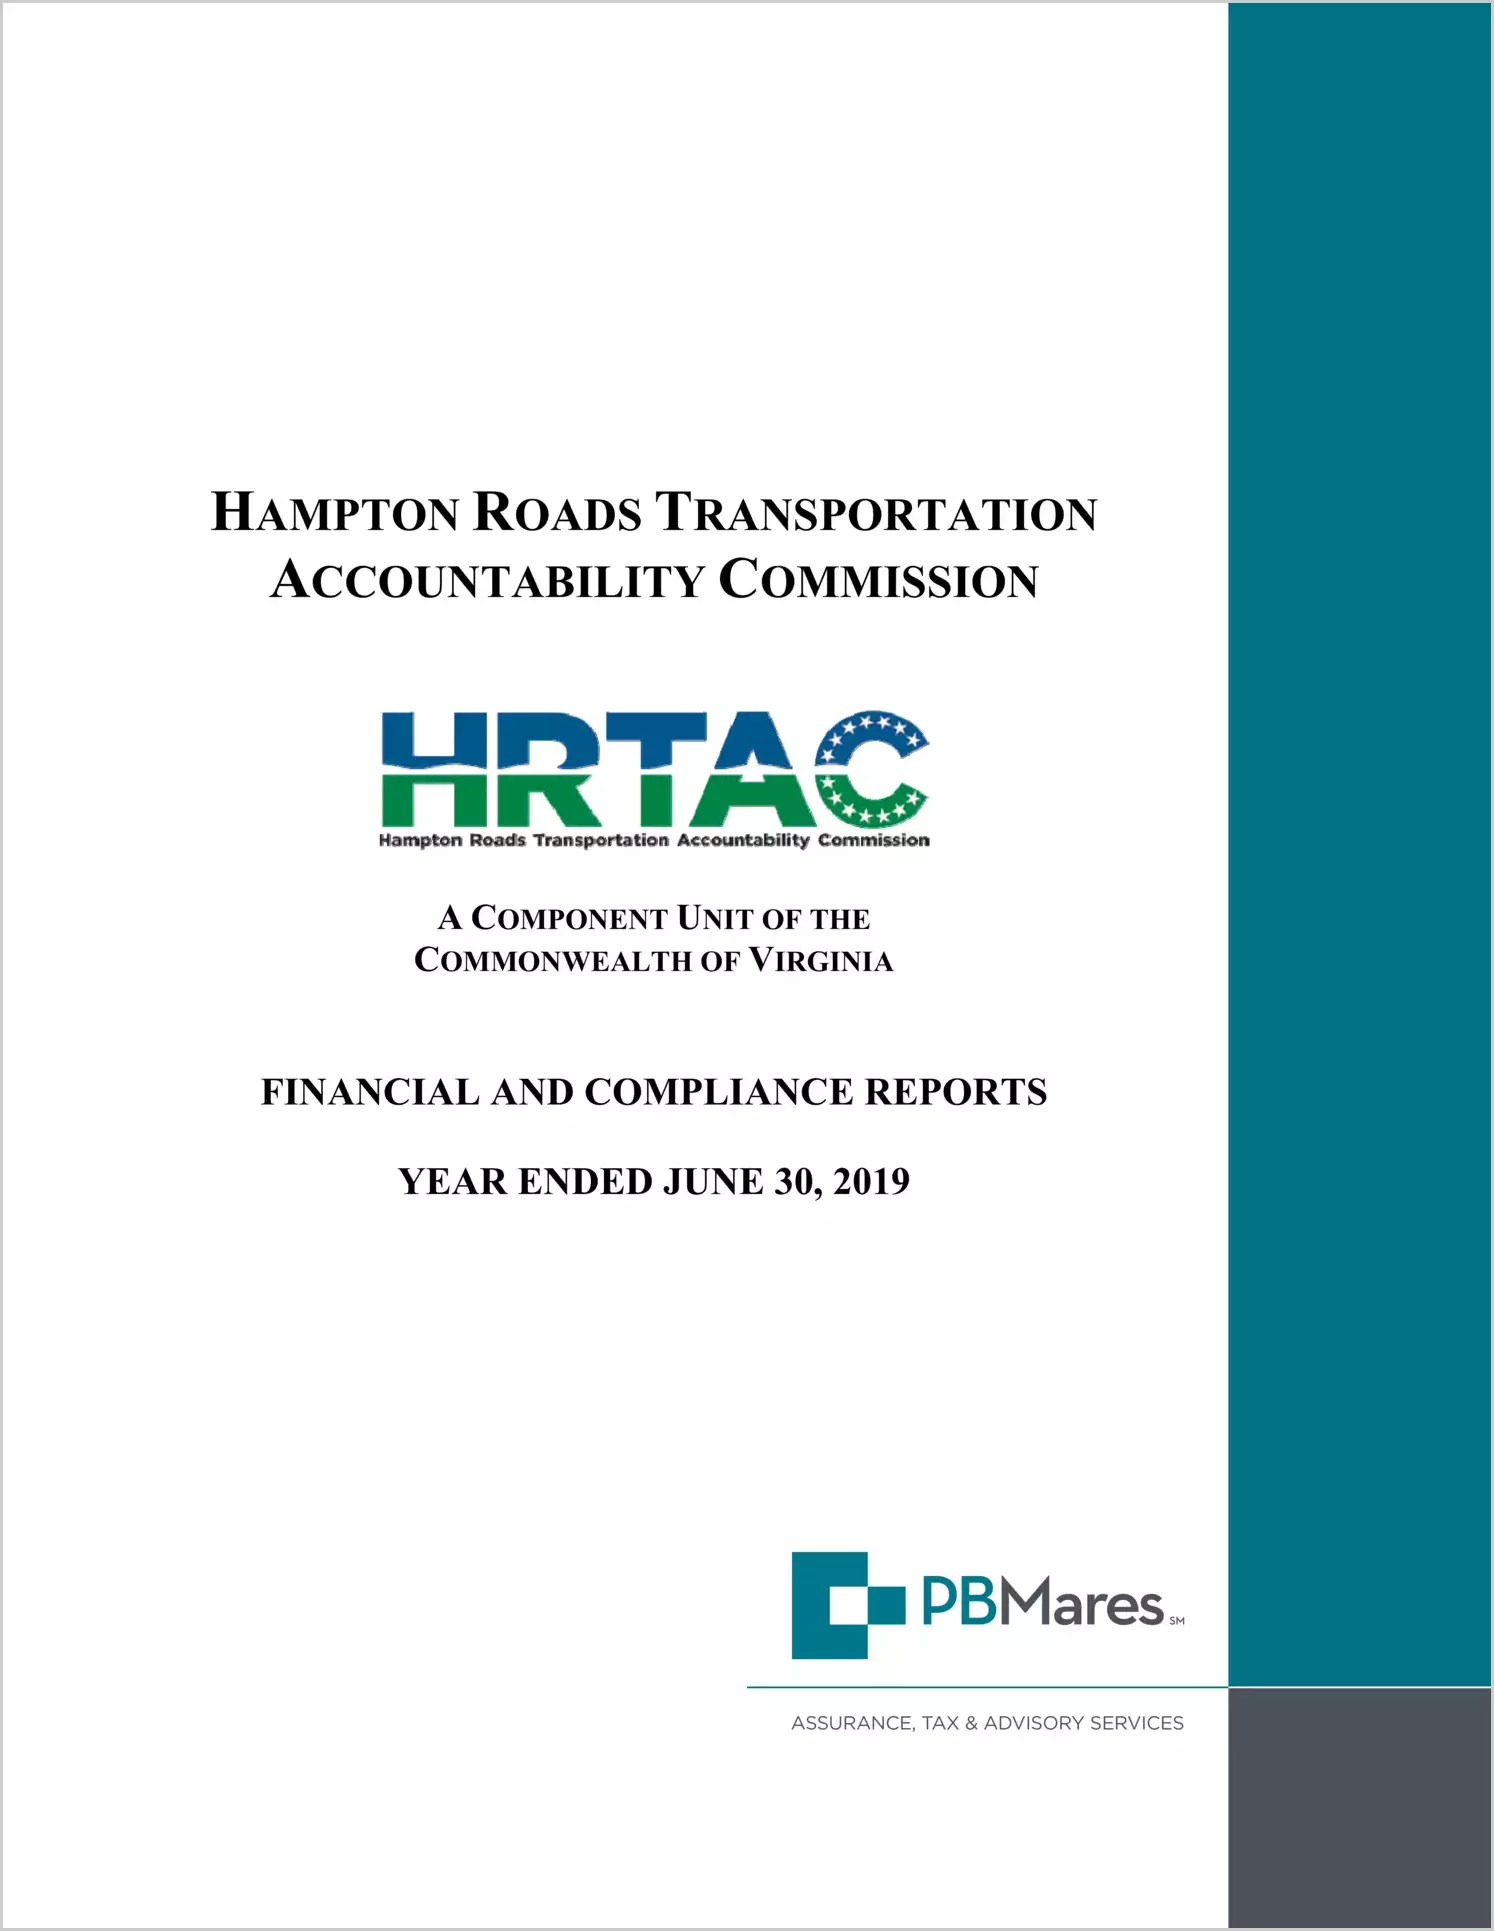 Hampton Roads Transportation Accountability Commission for the year ended June 30, 2019